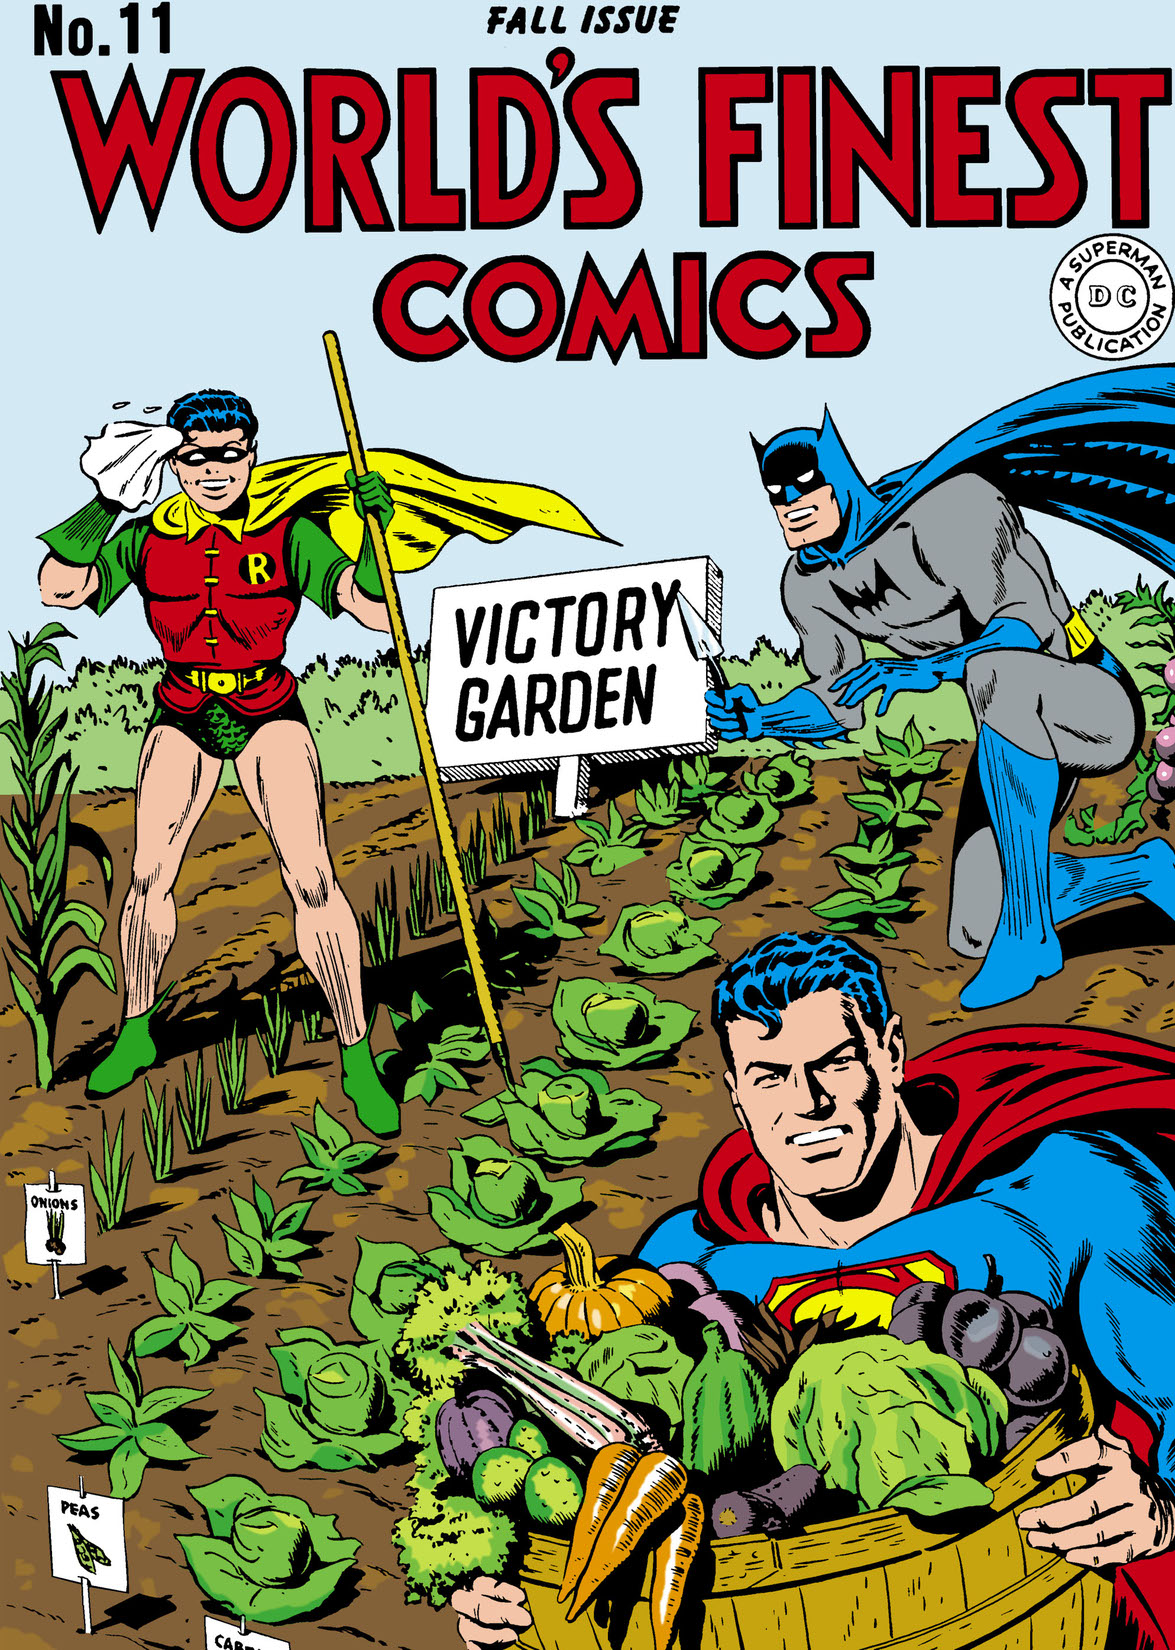 World's Finest Comics (1941-) #11 preview images